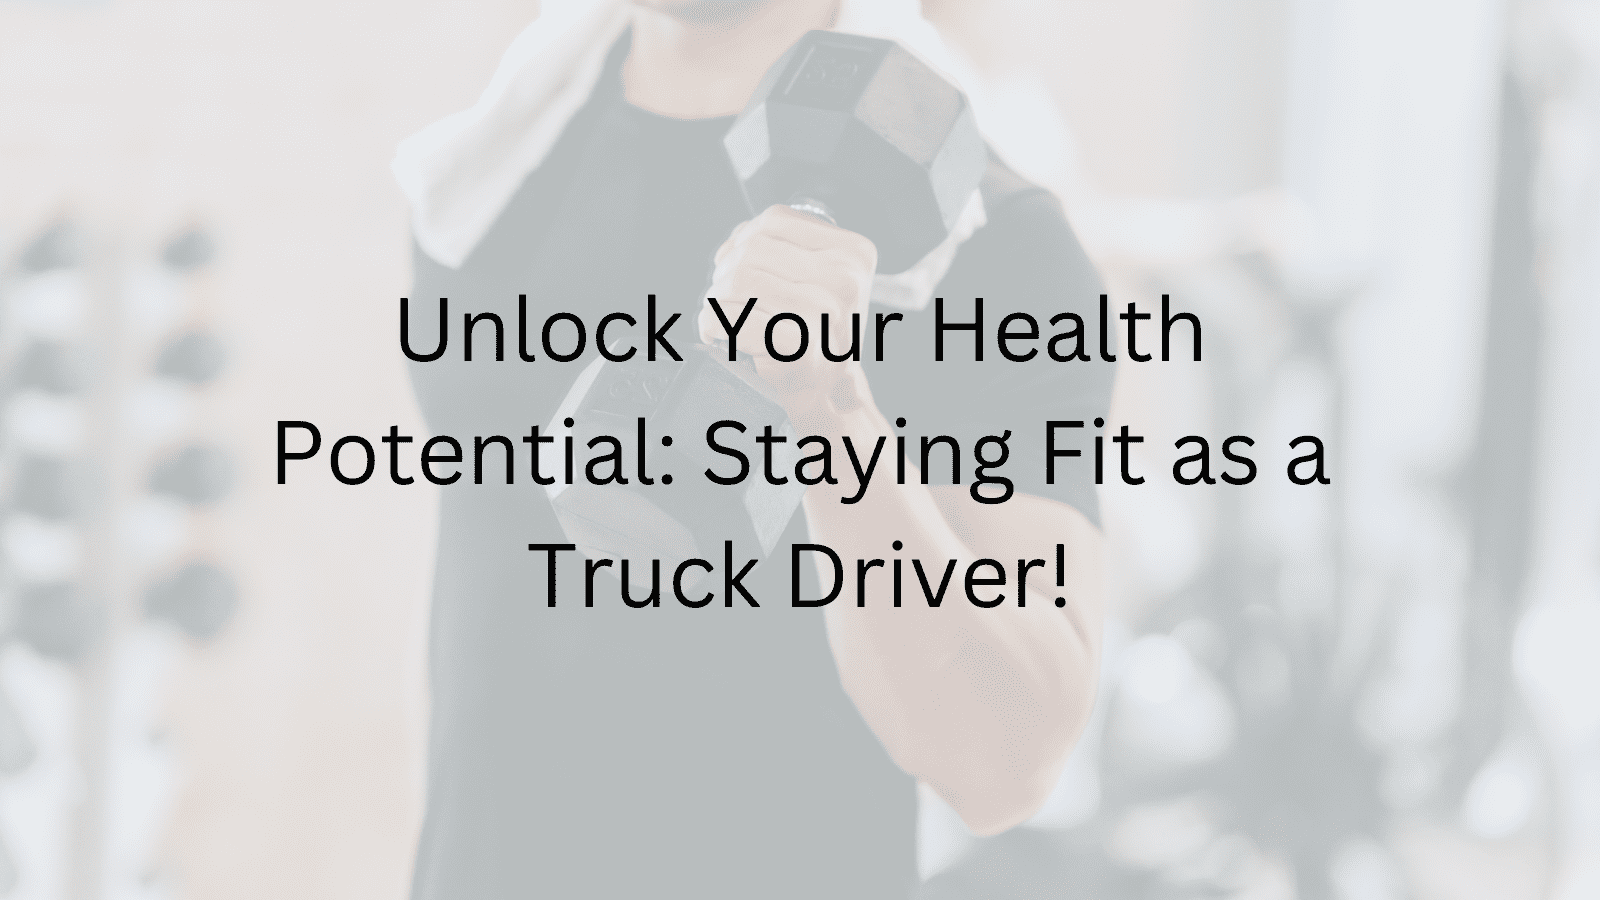 Staying Fit as a Truck Driver